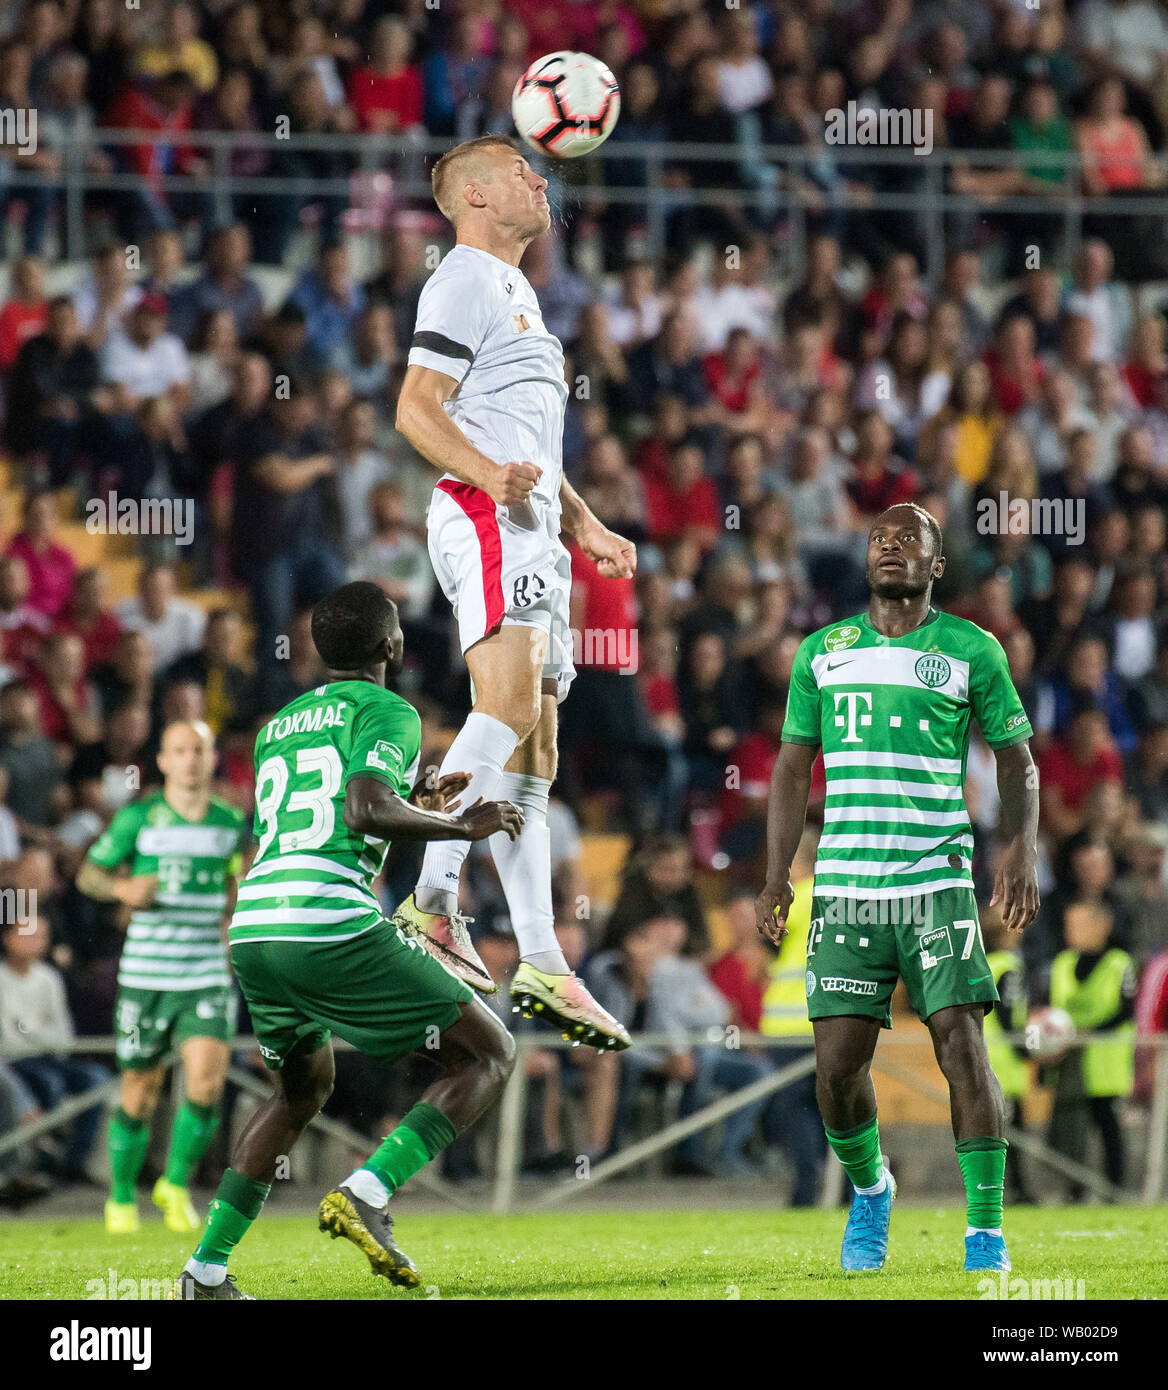 Marijampole, Lithuania. 22nd Aug, 2019. Algis Jankauskas (top) of Suduva competes during the first leg match of UEFA Europa League play-offs between Suduva of Lithuania and Ferencvaros of Hungary in Marijampole, Lithuania, Aug. 22, 2019. Credit: Alfredas Pliadis/Xinhua/Alamy Live News Stock Photo